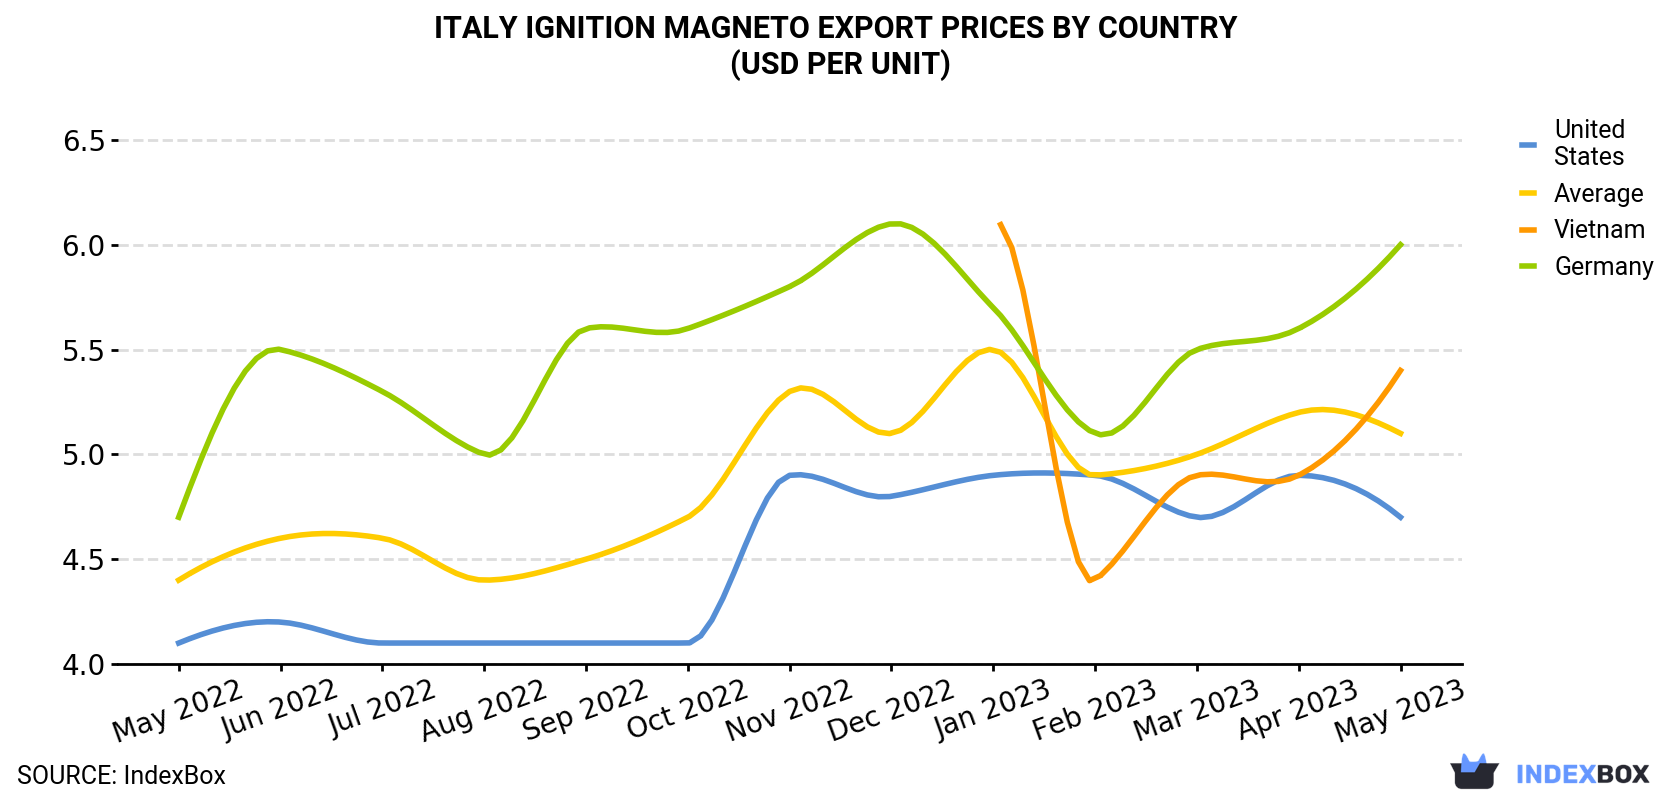 Italy Ignition Magneto Export Prices By Country (USD Per Unit)